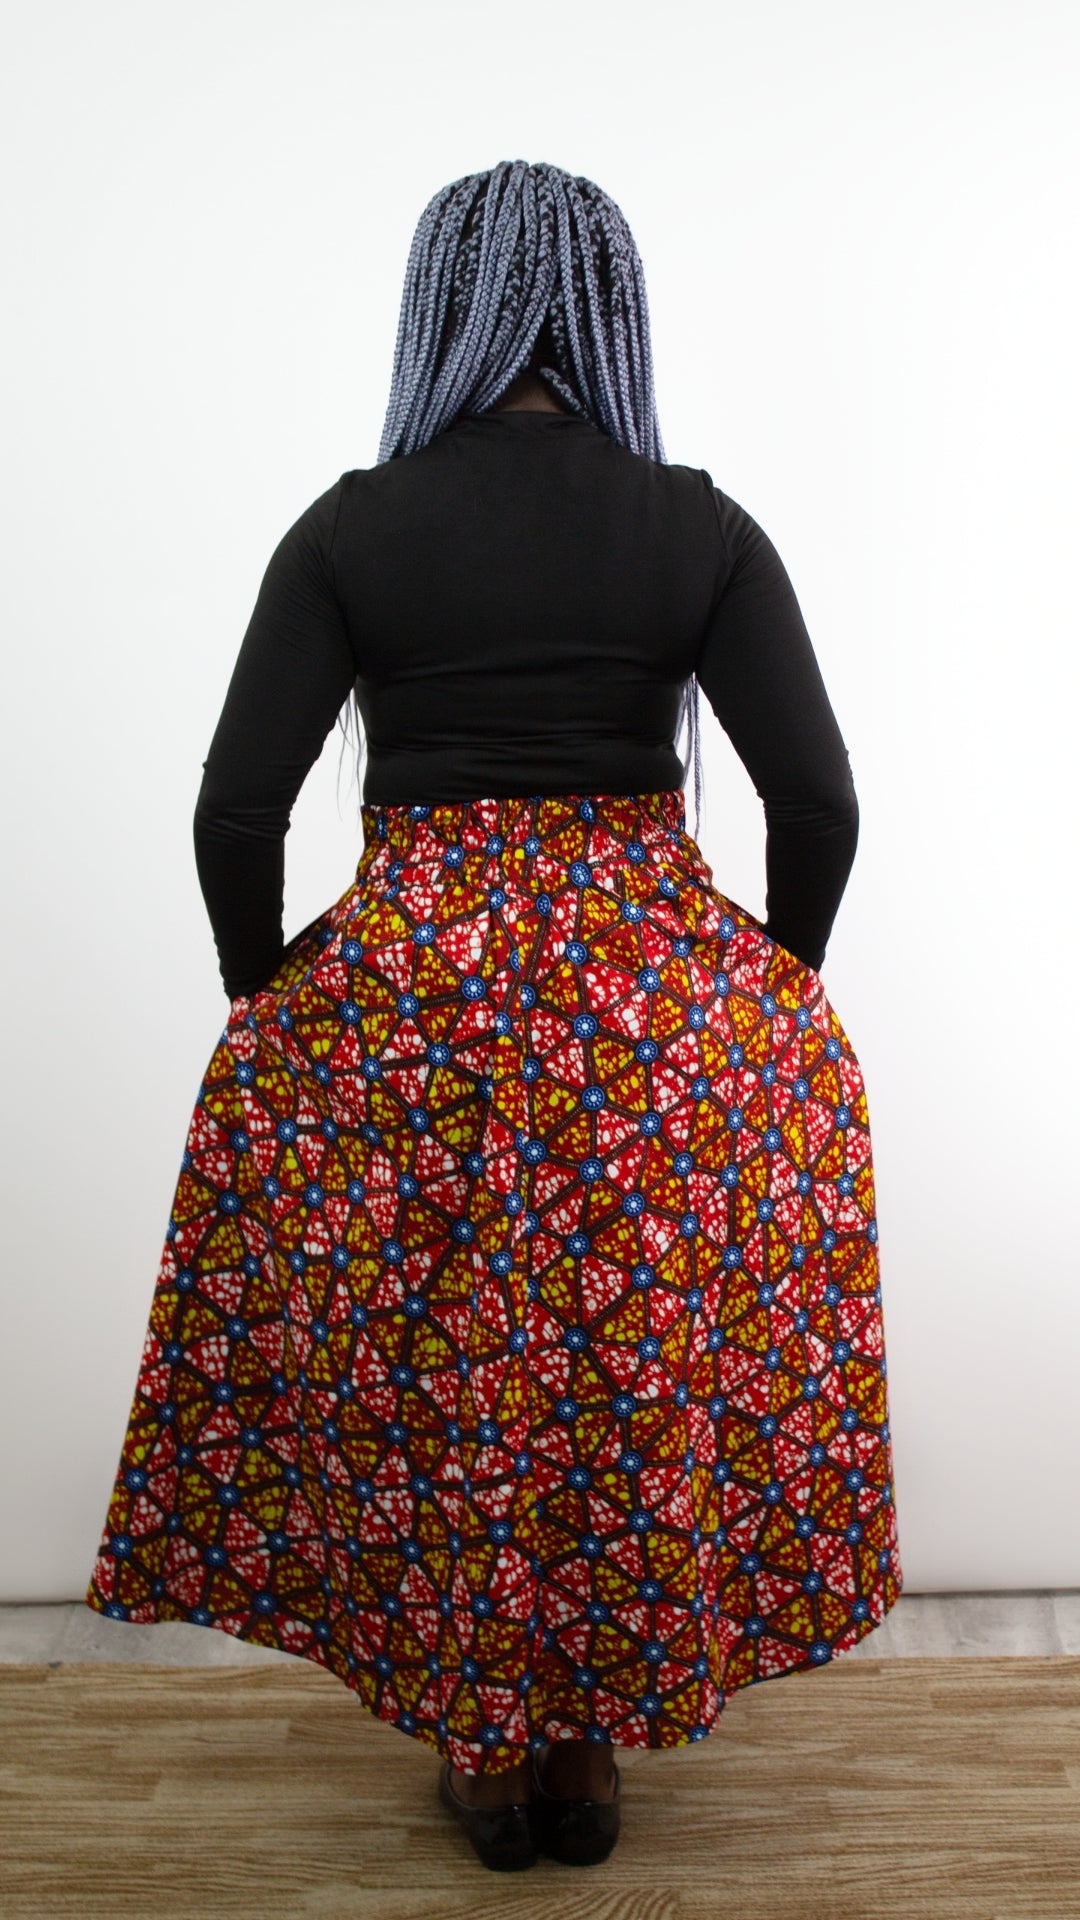 the back of a model with blue hair posing standing in a mosaic print long skirt.